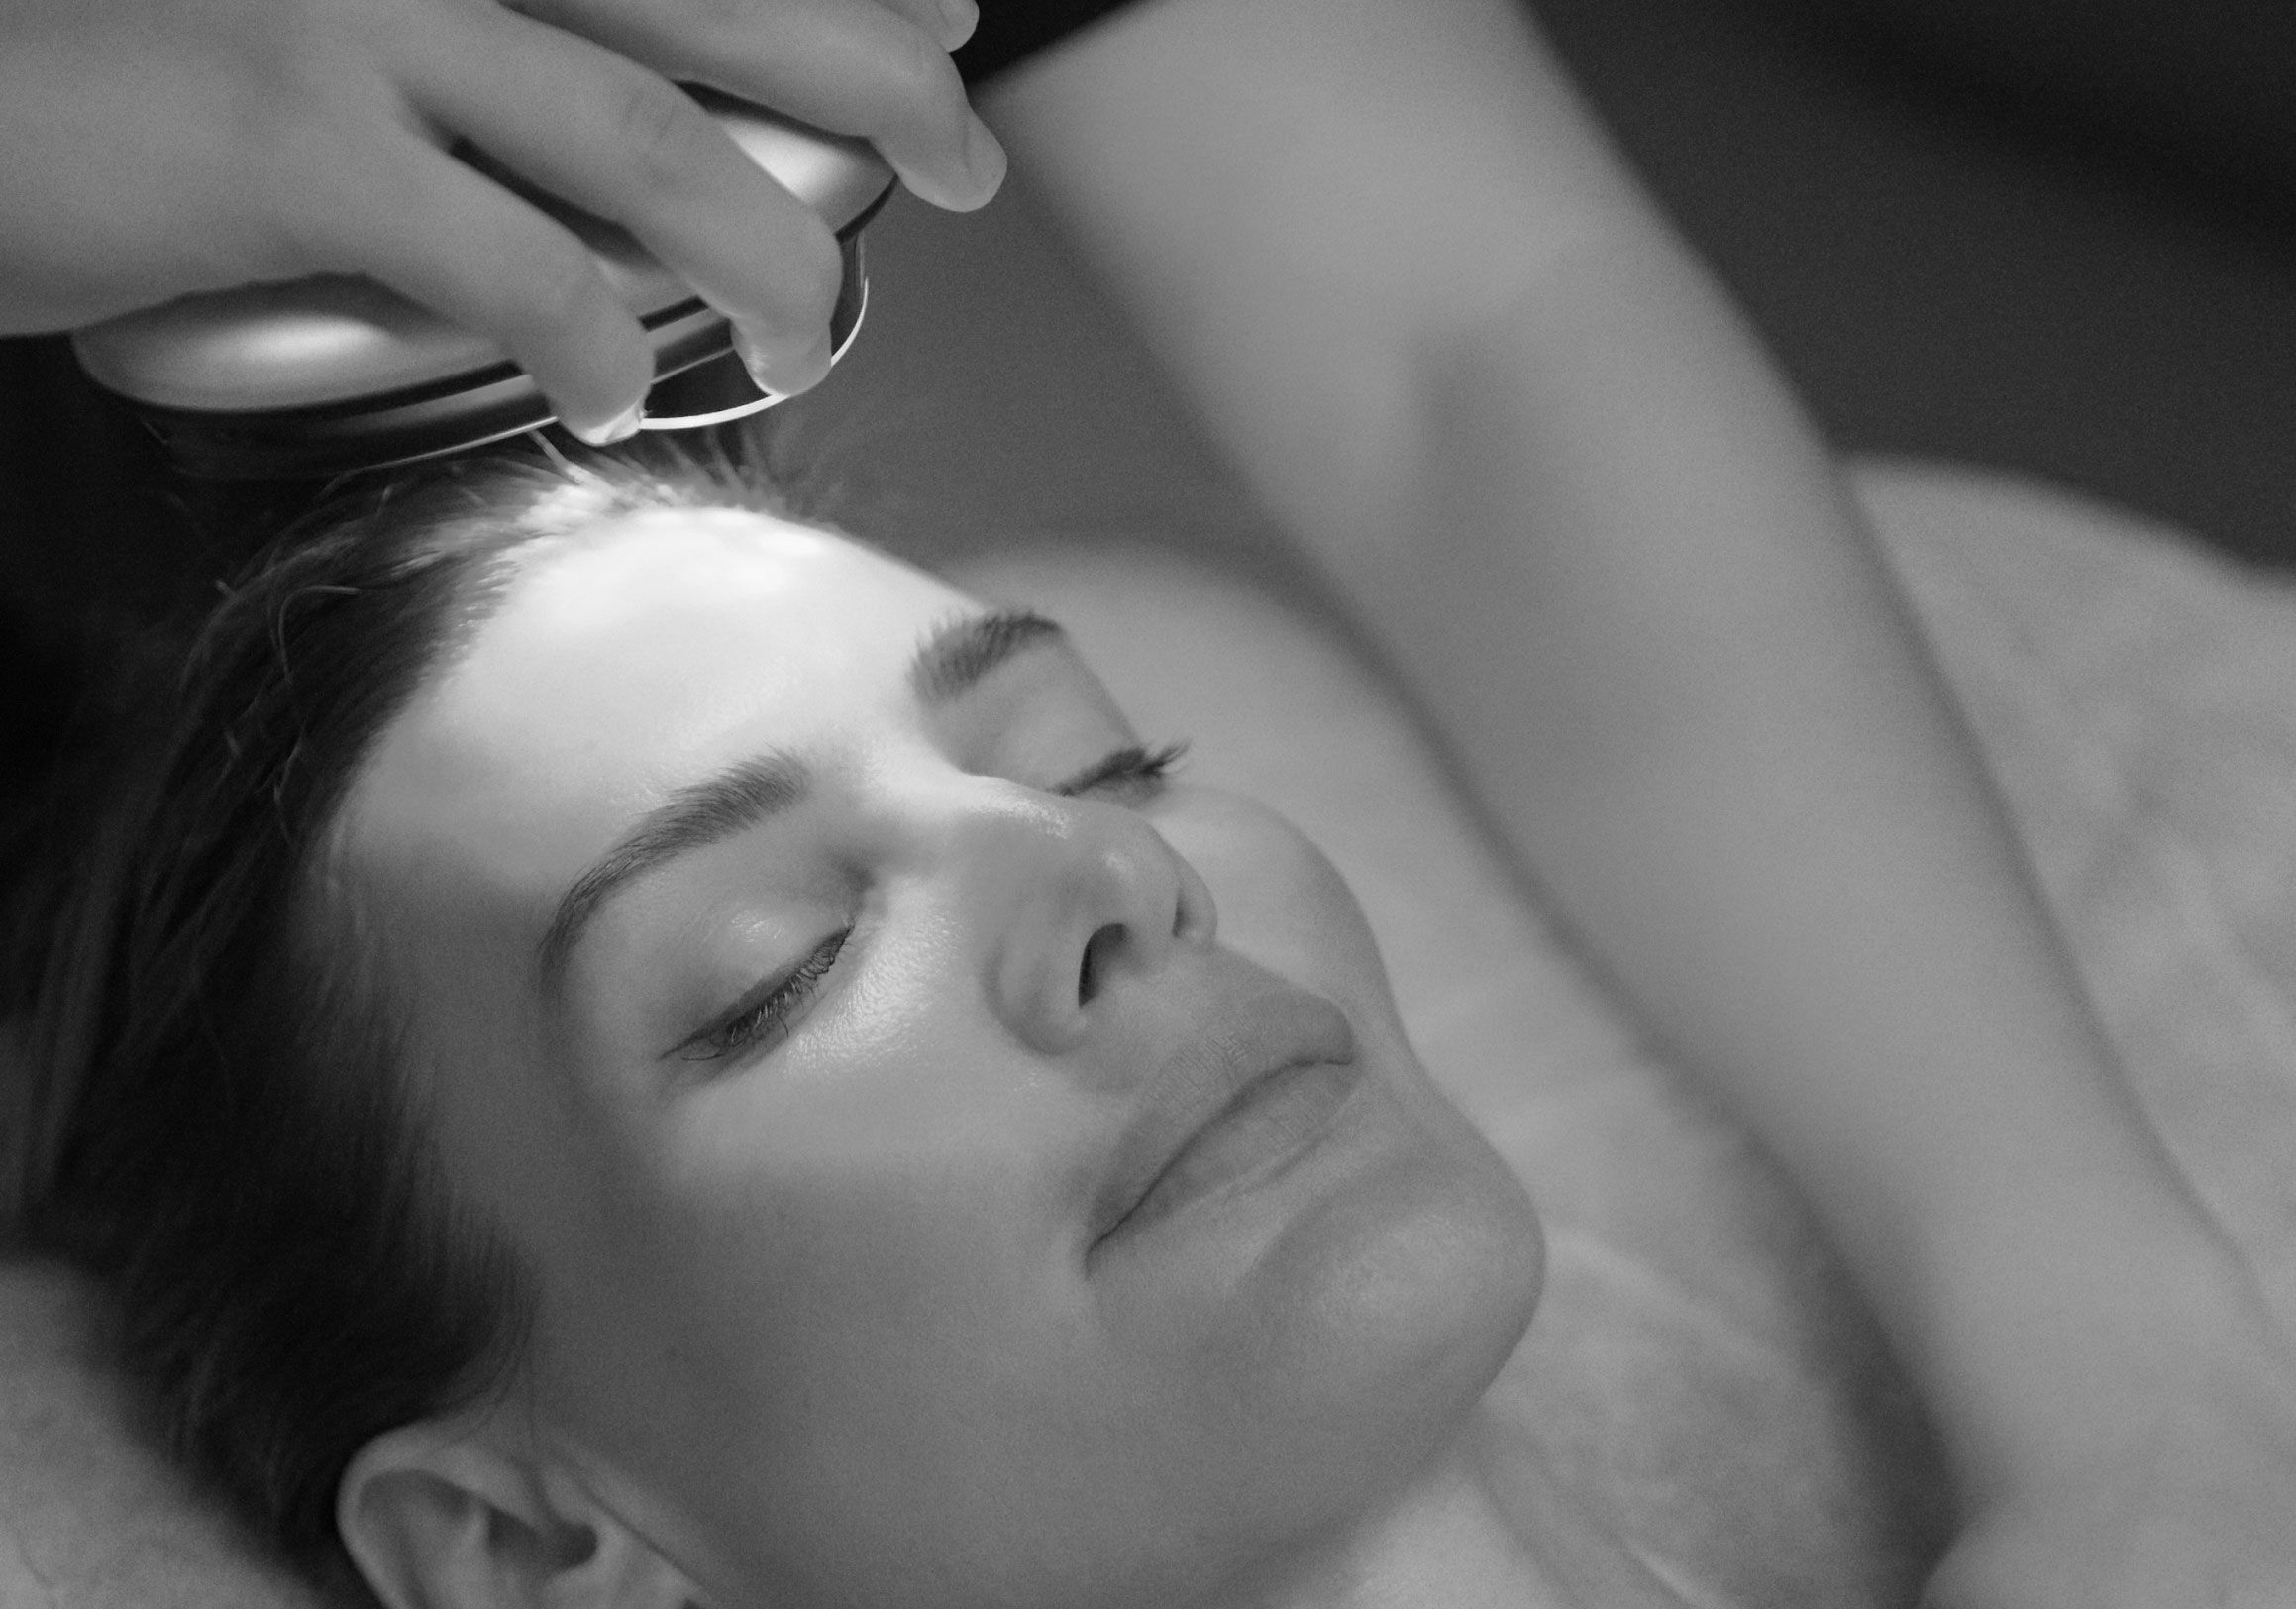 A black and white image of a woman receiving a facial treatment with a red light therapy device